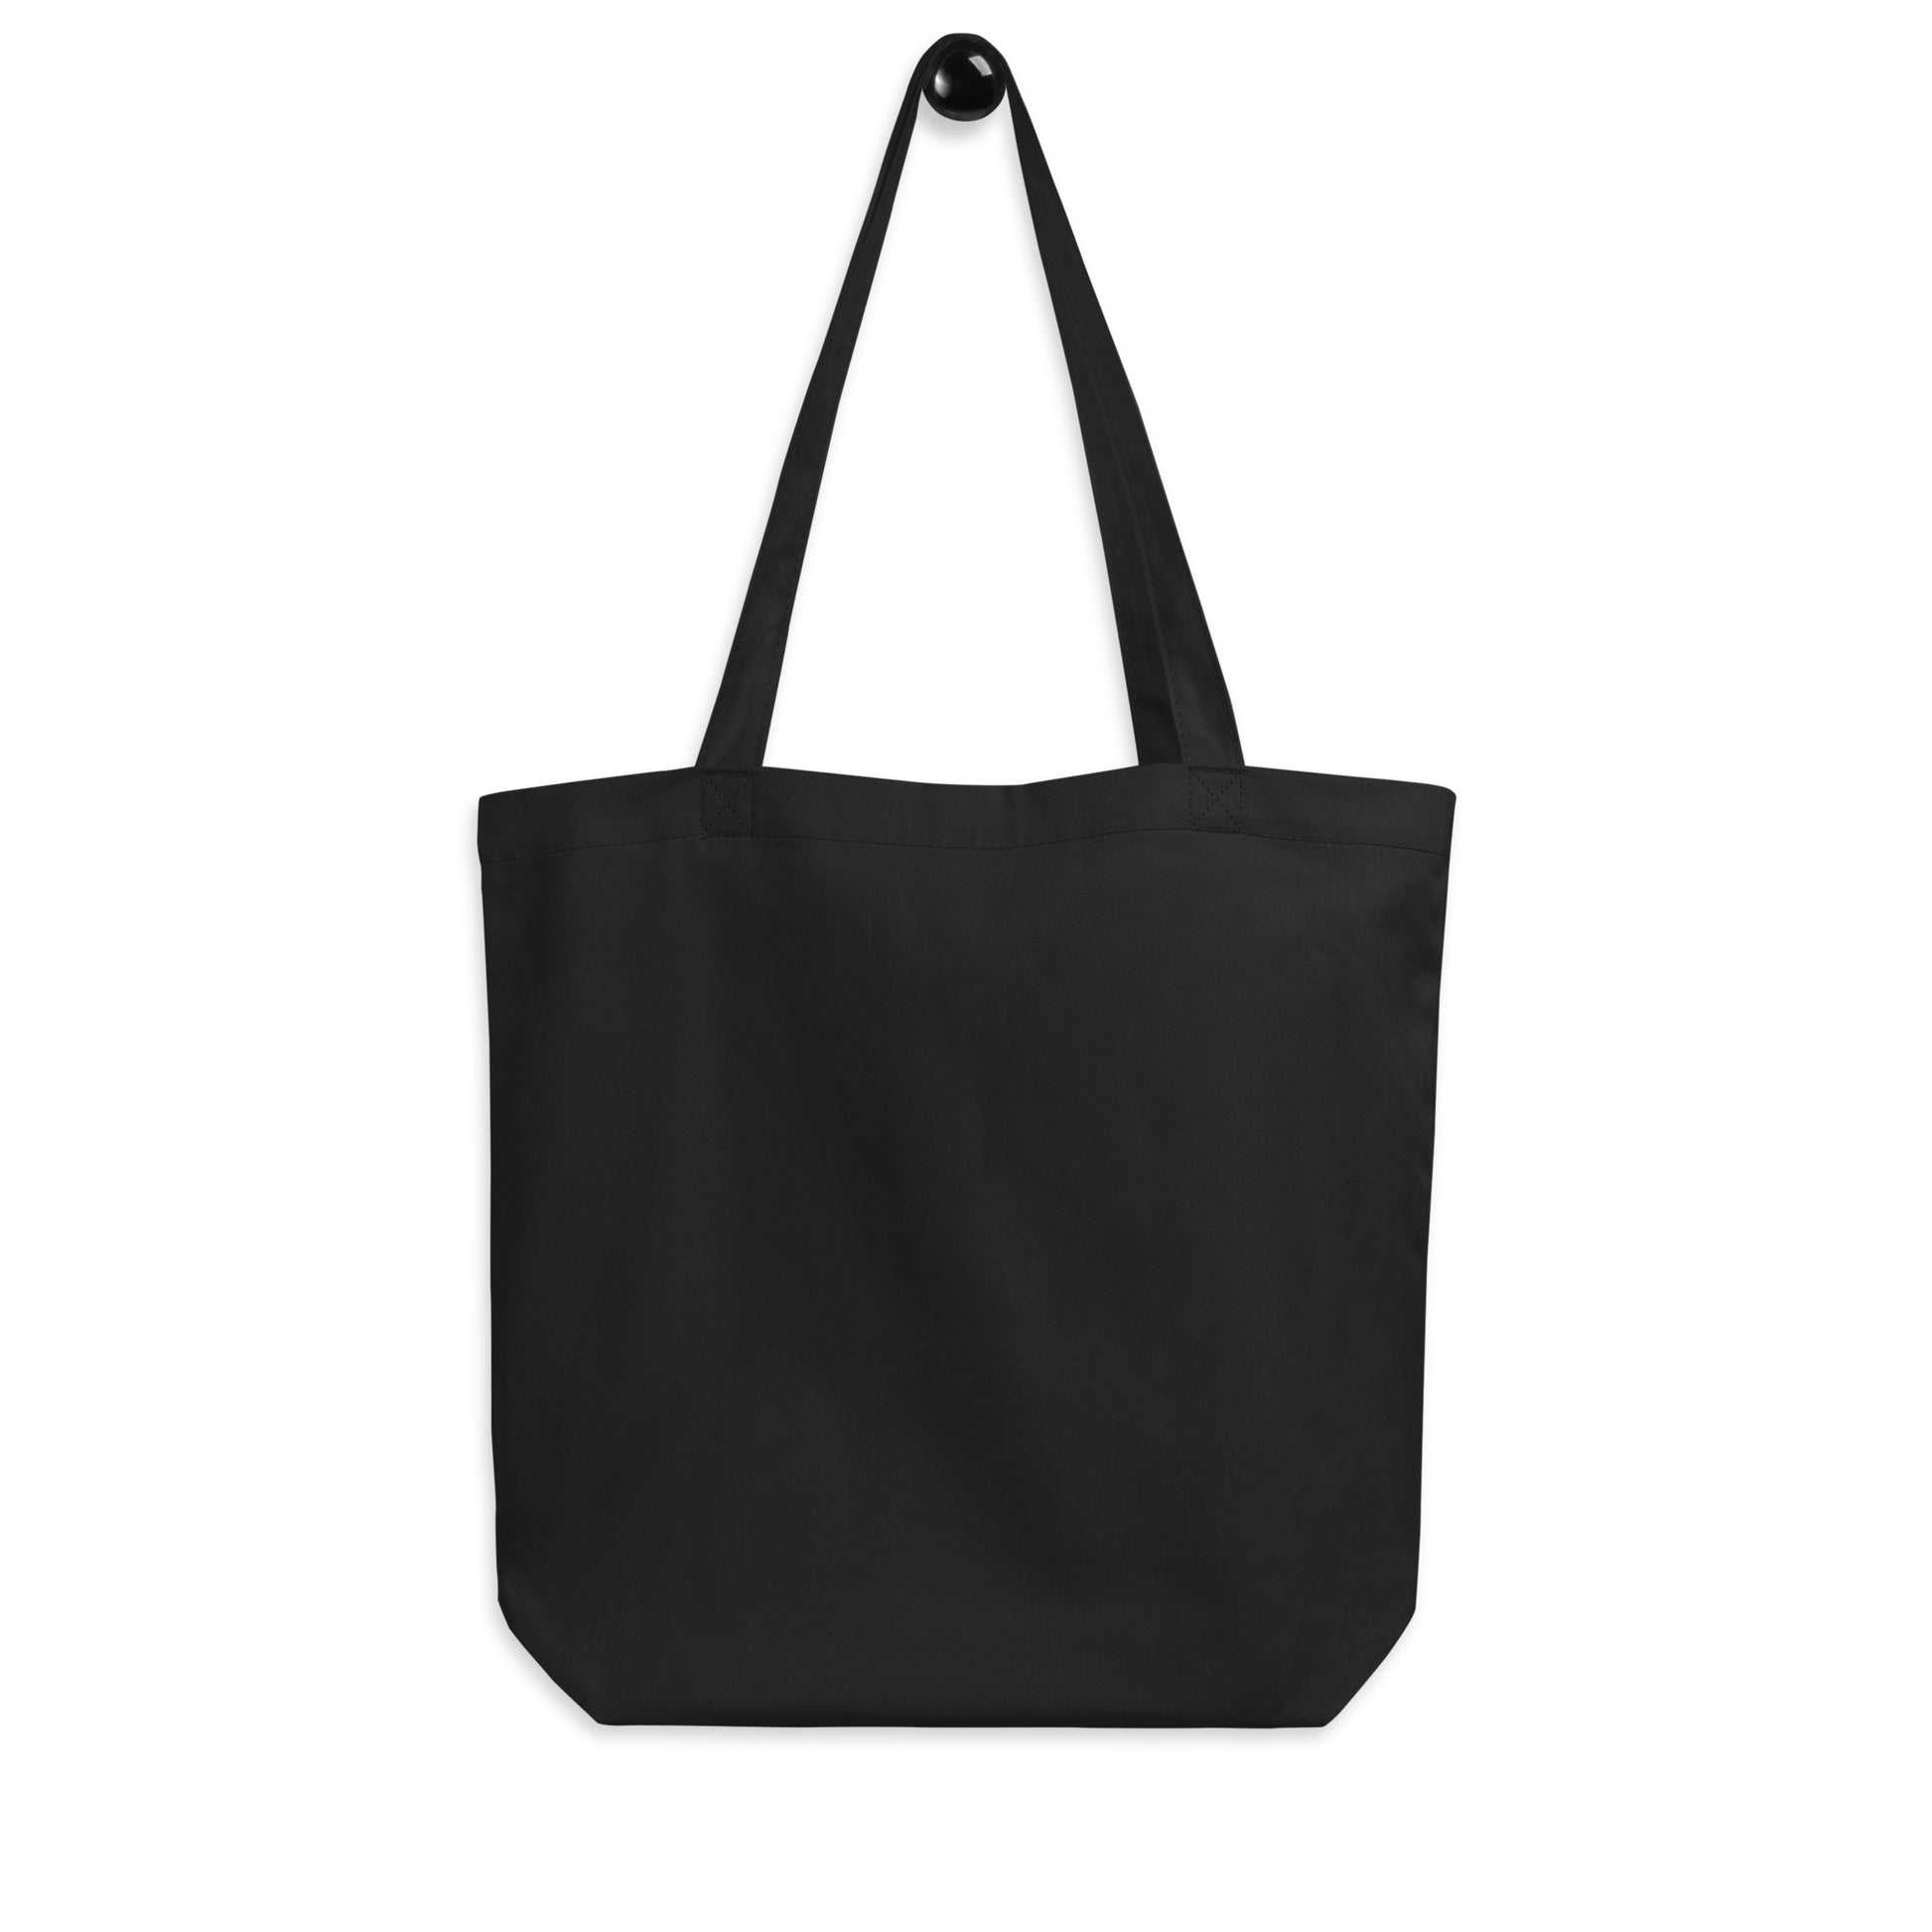 Unique Travel Gift Organic Tote - White Oval • PIT Pittsburgh • YHM Designs - Image 05